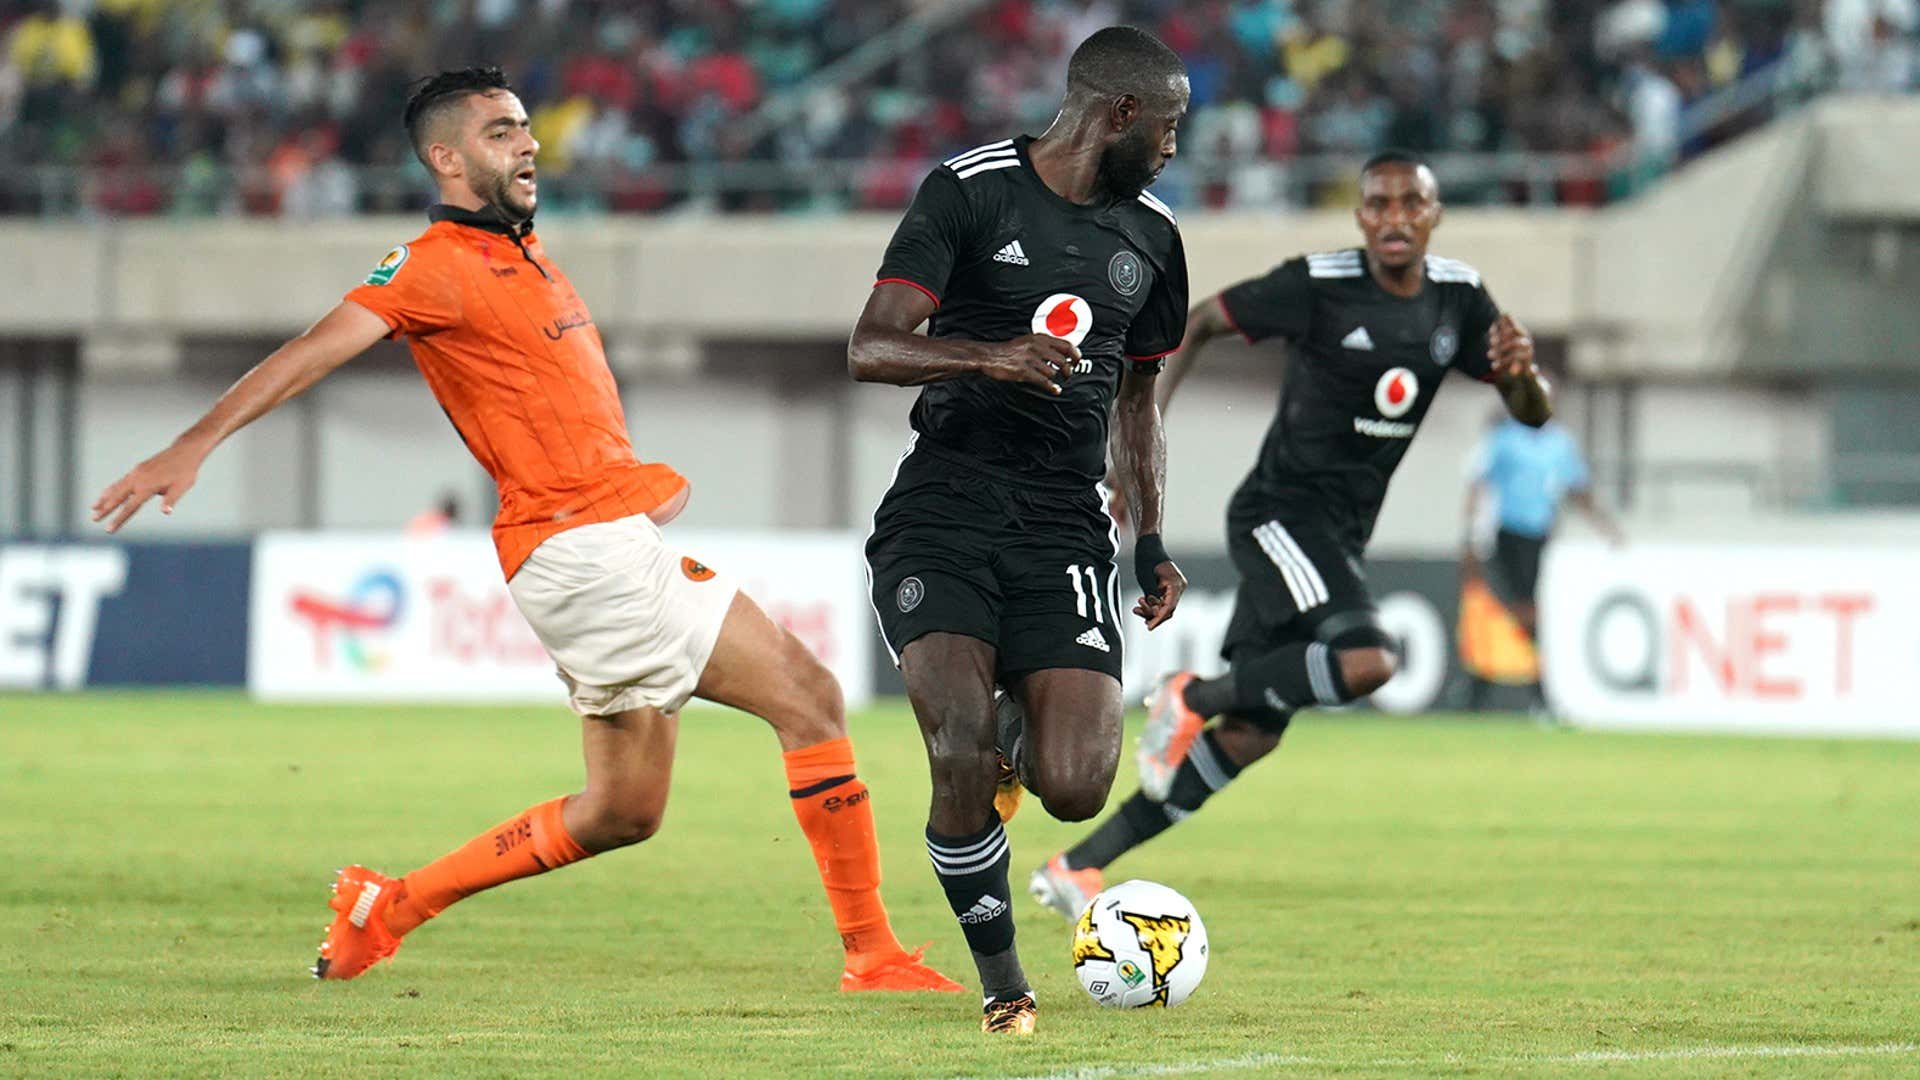 Caf Confederation Cup: Orlando Pirates did not deserve to lose to RS Berkane - Kerr